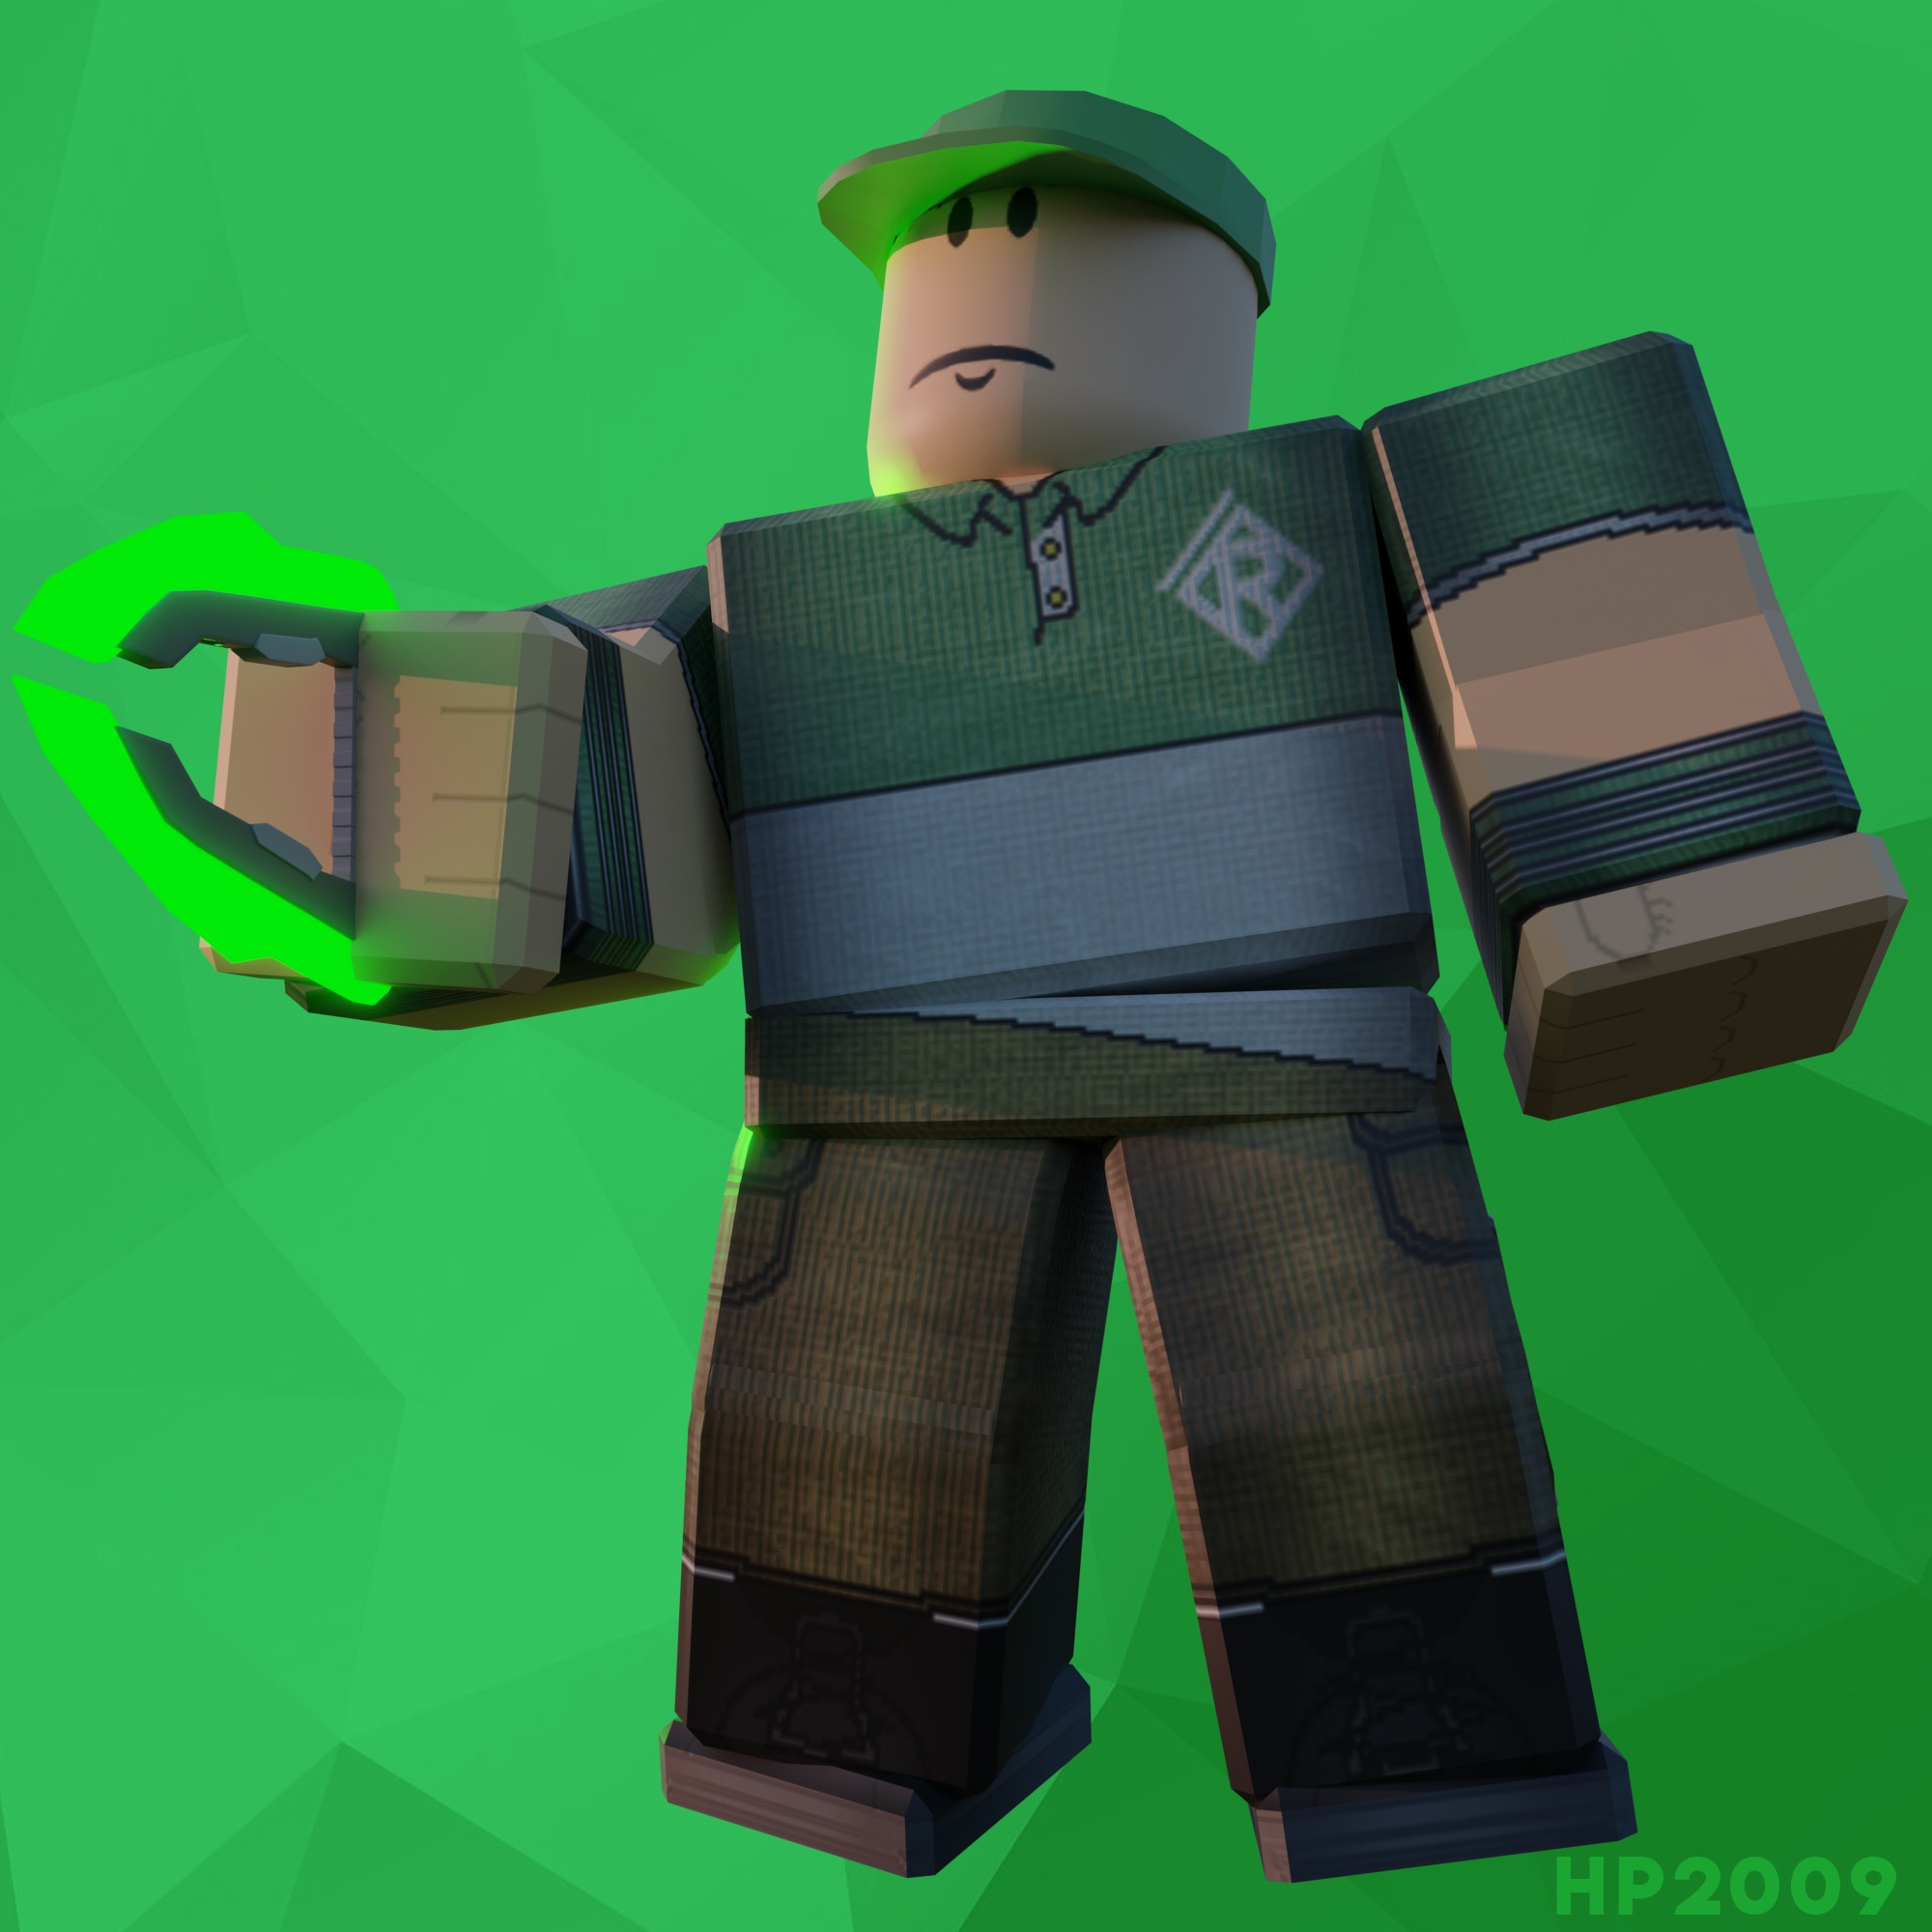 Hp2009 Gfx On Twitter Made Some Arsenal Renders Rolvestuff Roblox Robloxdev Robloxgfx Robloxart - roblox renders and gfx radbearsalad twitter